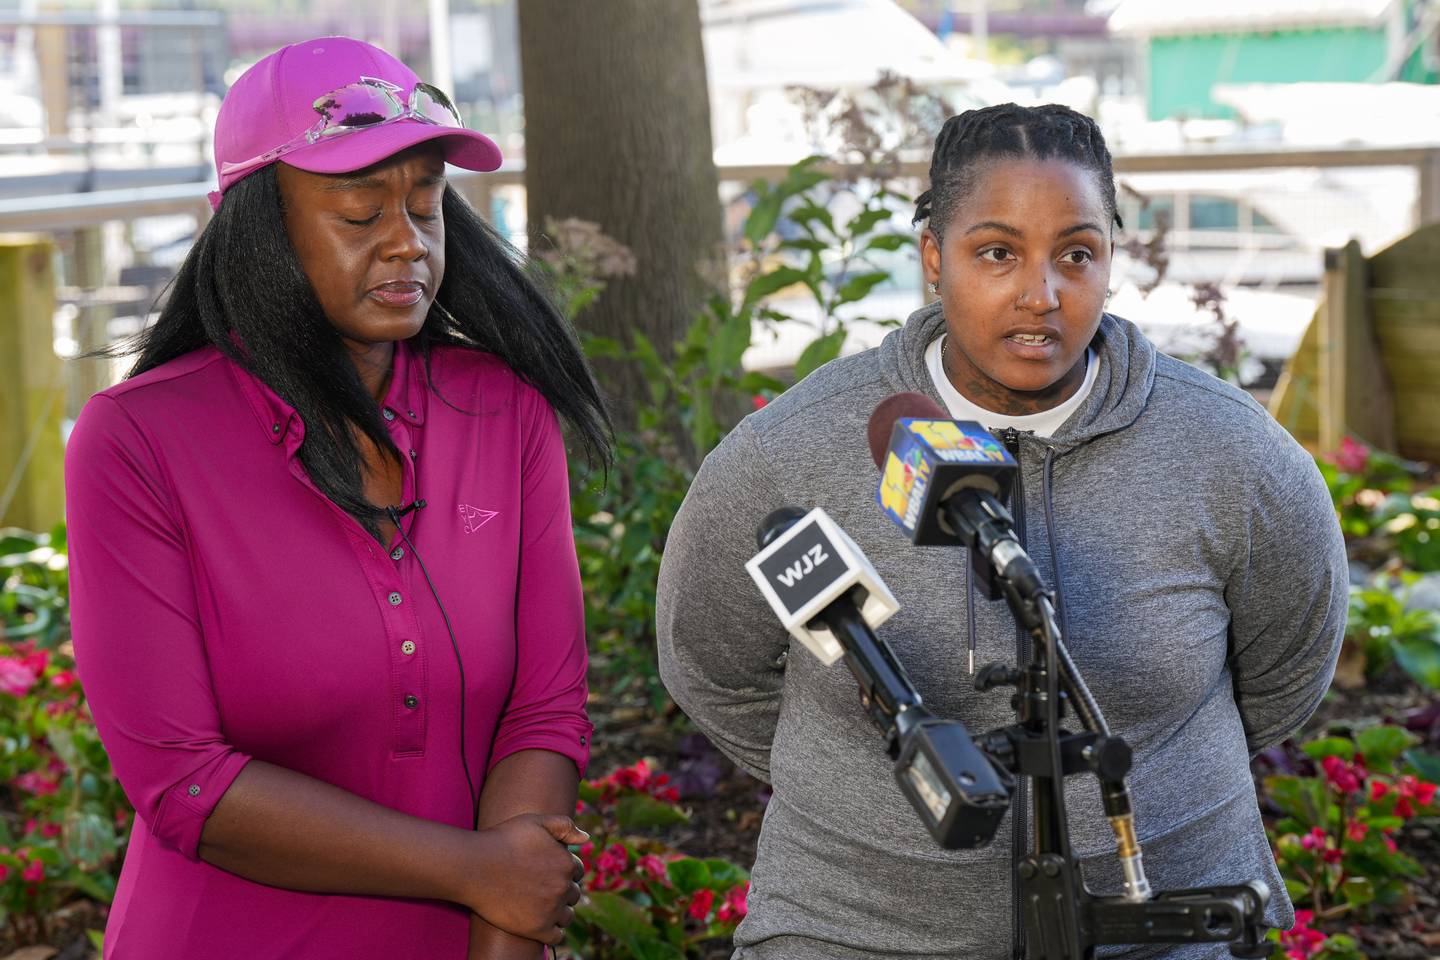 Victoria Lawson, right, stands with her brother Donald Lawson’s wife, Jacqueline Lawson, during a press conference in Eastport on July 24, 2023 regarding Donald’s disappearance during a recent sailing trip. Donald’s family hasn’t been able to reach him for more than a week as of Monday during the presser.